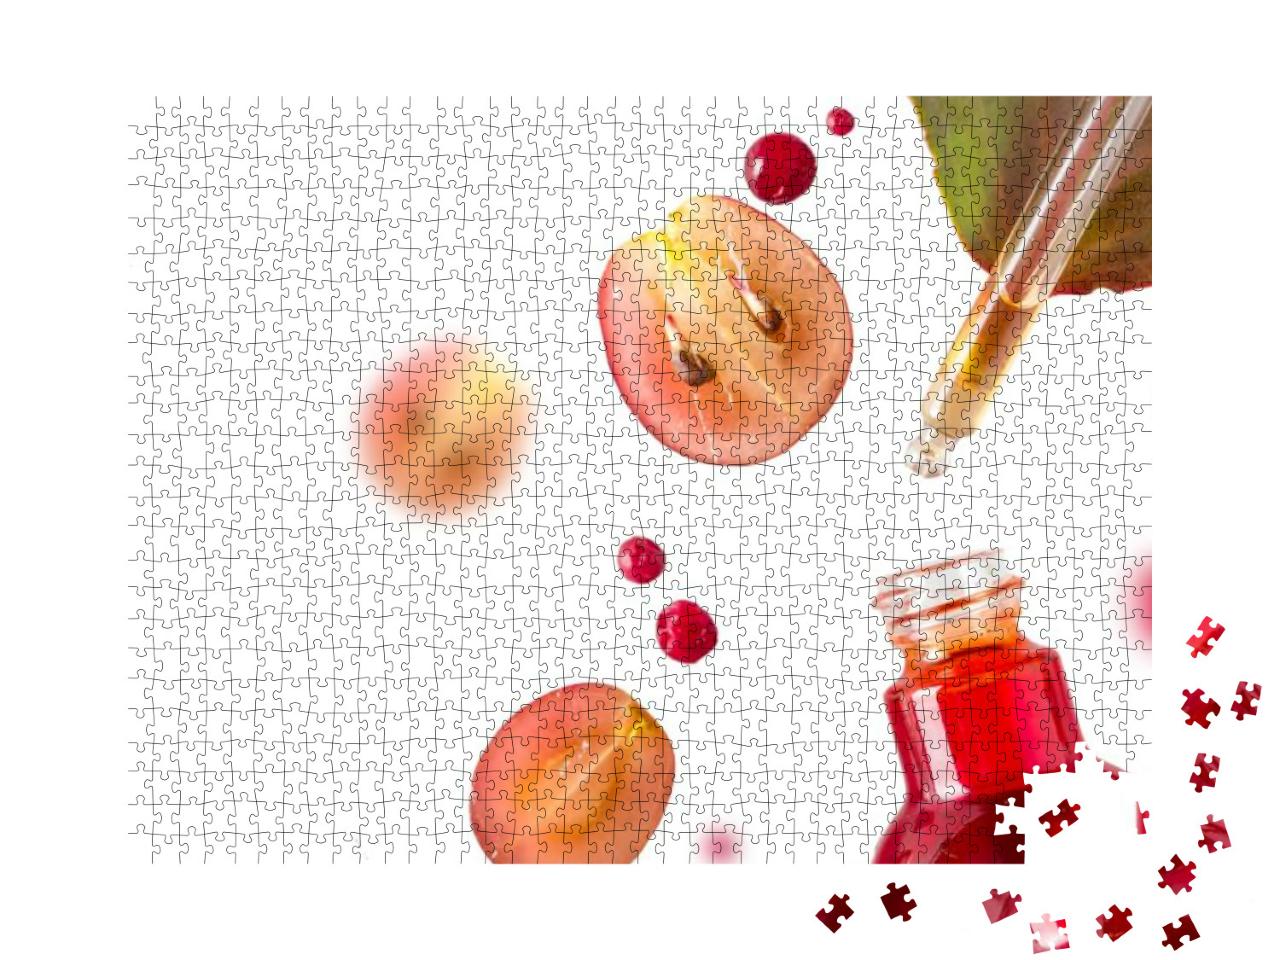 Organic Bio Cosmetics with Herbal Ingredients. Copy Space... Jigsaw Puzzle with 1000 pieces